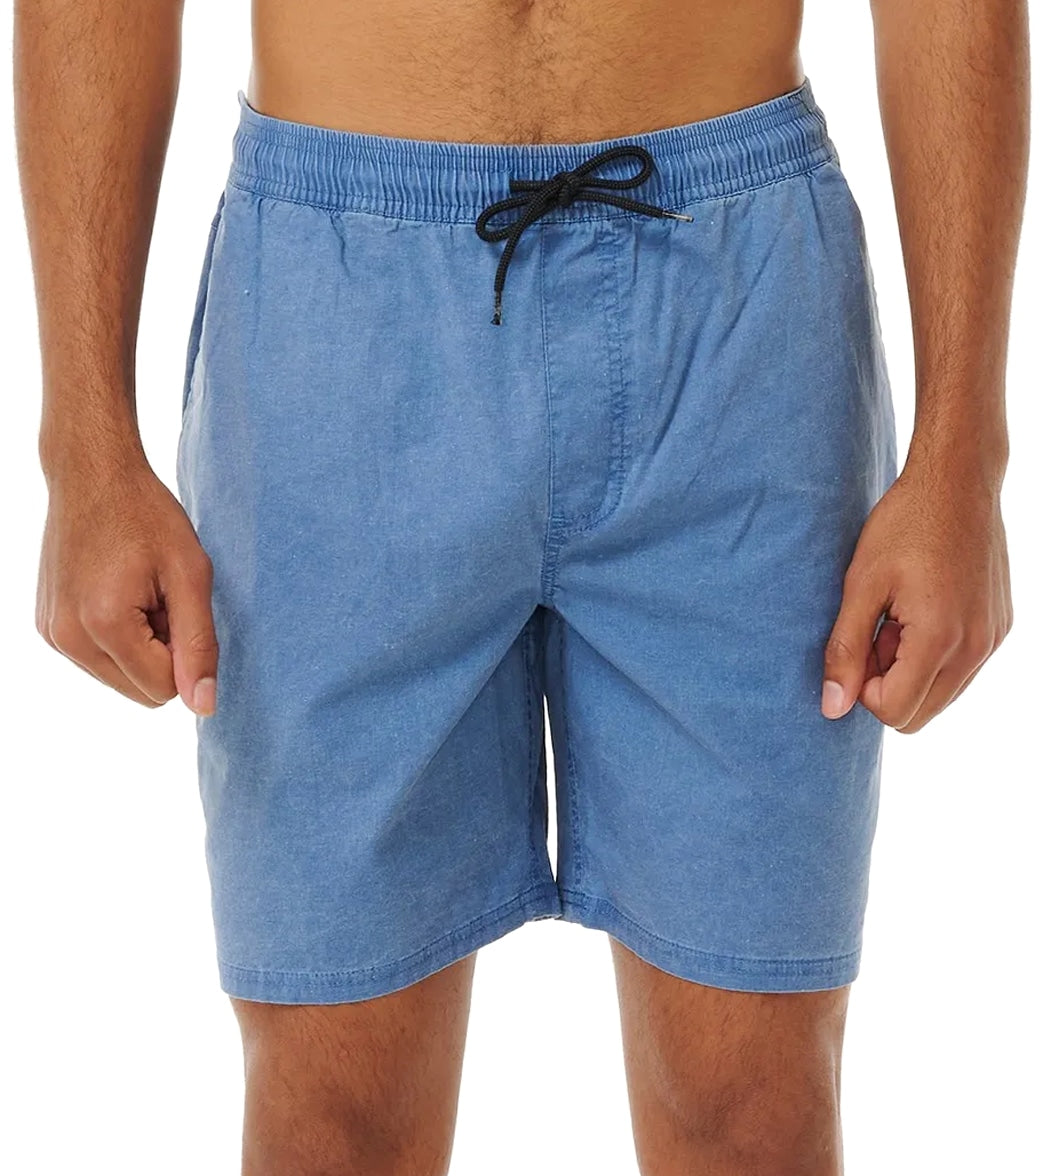 Rip Curl Mens 17 Quality Surf Products Swim Trunks